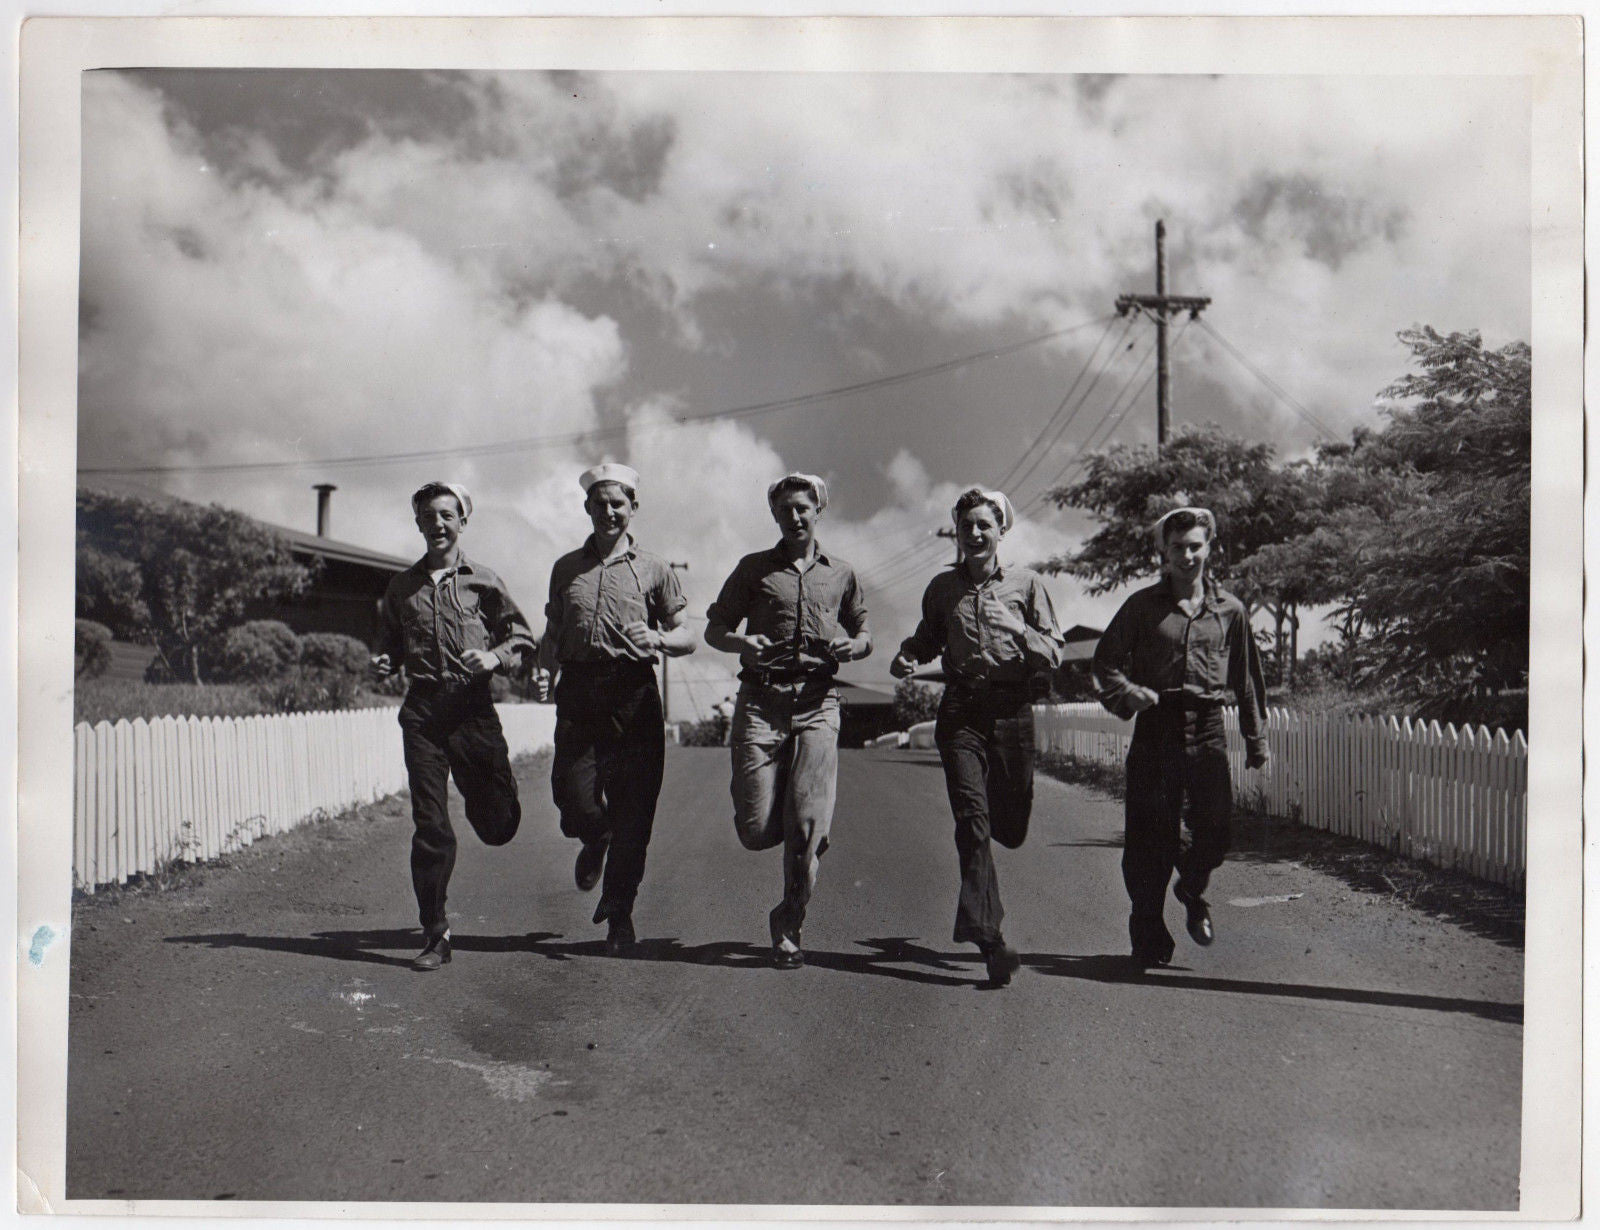 WWII SAILOR BOYS ATOMIC BOMB CREW OPERATION CROSSROADS LARGE 11x14 PHOTOGRAPH - K-townConsignments